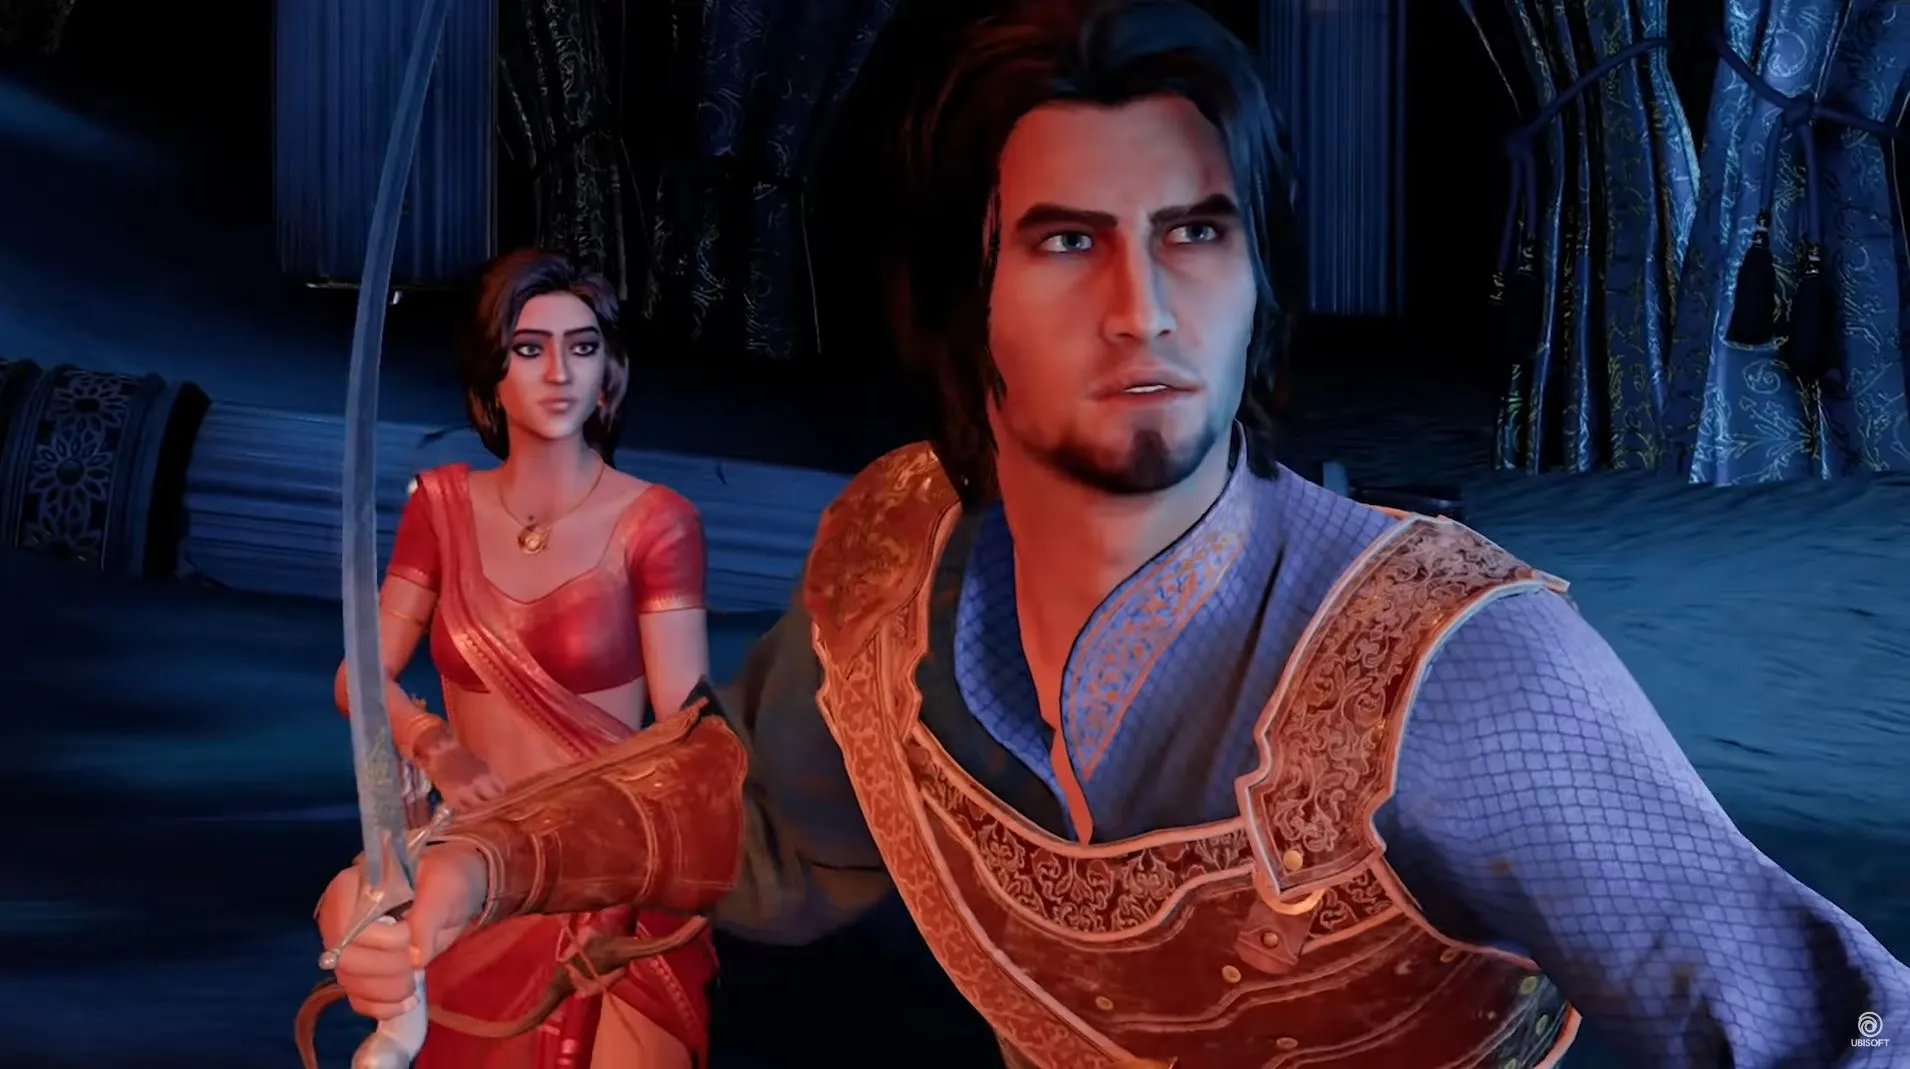 Flere lektier Furnace Prince of Persia: Sands of Time Remake Delayed Again - Siliconera